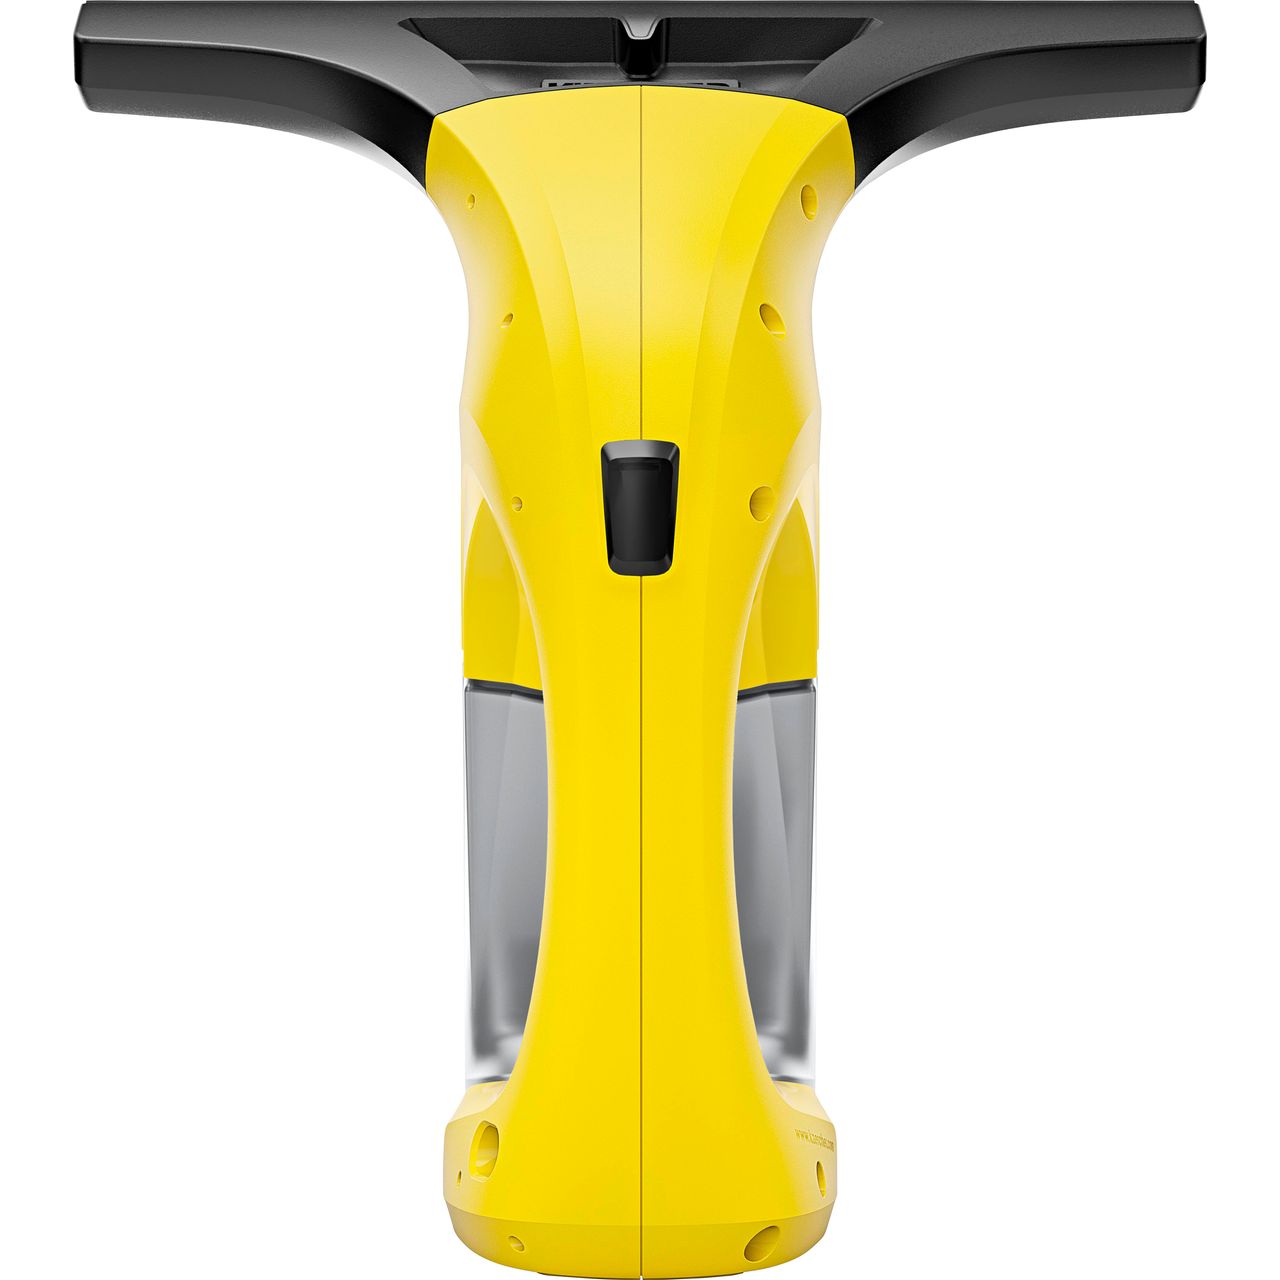 Karcher WV 1 Window Vacuum Cleaner Review